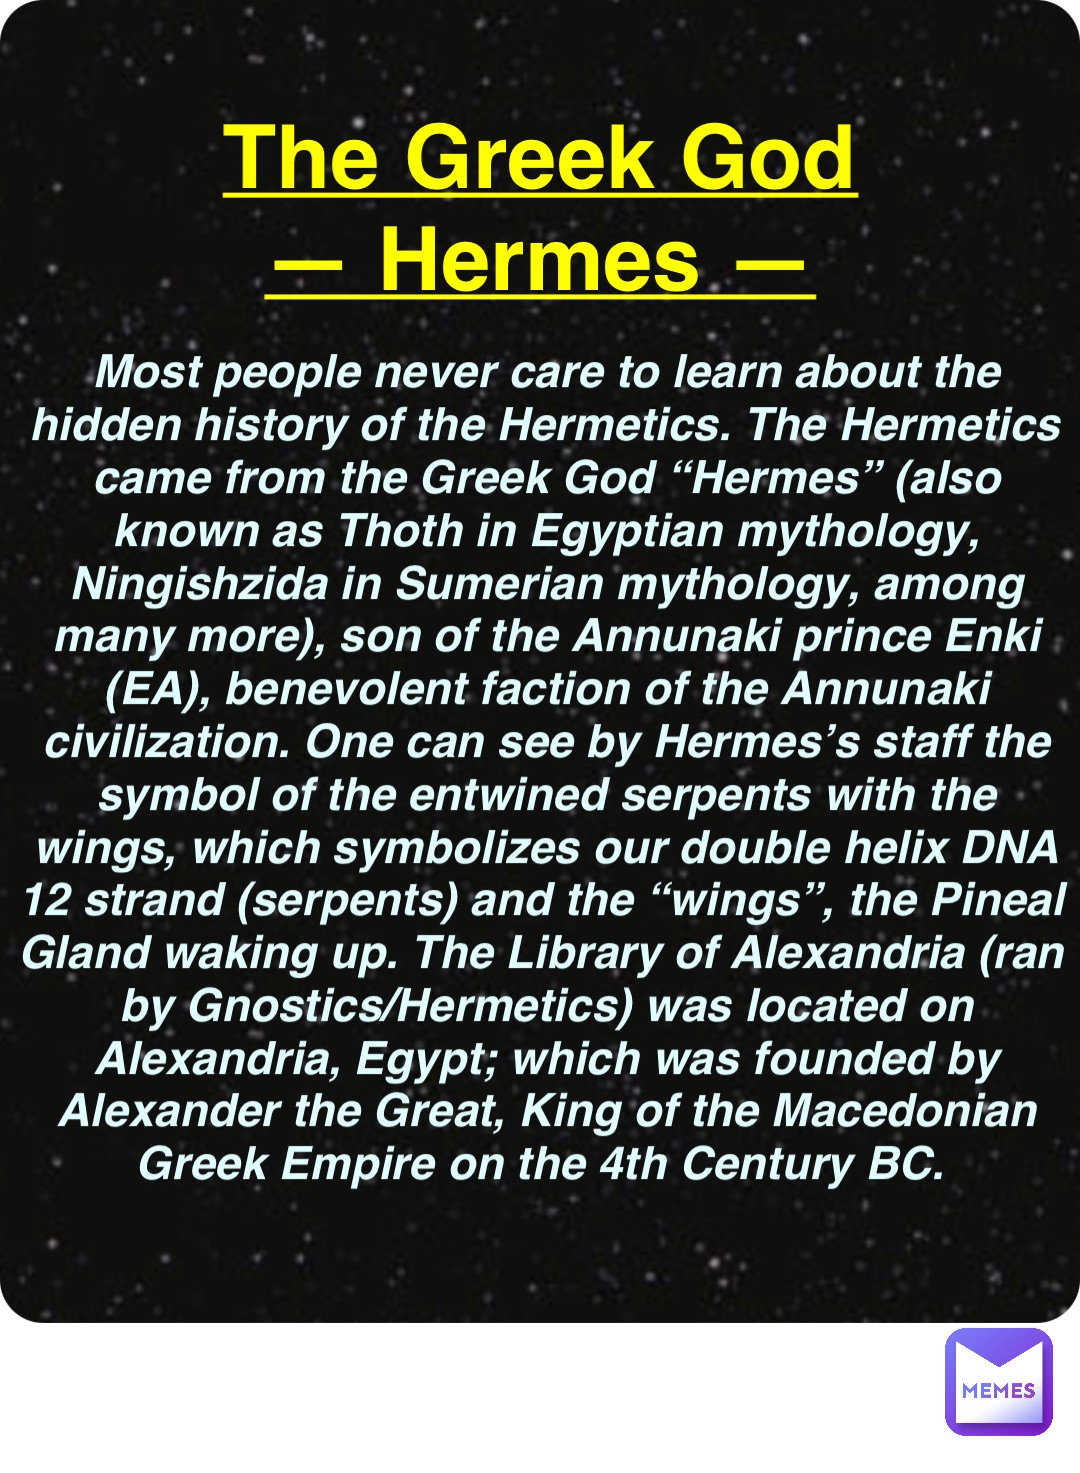 Double tap to edit The Greek God
— Hermes — Most people never care to learn about the hidden history of the Hermetics. The Hermetics came from the Greek God “Hermes” (also known as Thoth in Egyptian mythology, Ningishzida in Sumerian mythology, among many more), son of the Annunaki prince Enki (EA), benevolent faction of the Annunaki civilization. One can see by Hermes’s staff the symbol of the entwined serpents with the wings, which symbolizes our double helix DNA 12 strand (serpents) and the “wings”, the Pineal Gland waking up. The Library of Alexandria (ran by Gnostics/Hermetics) was located on Alexandria, Egypt; which was founded by Alexander the Great, King of the Macedonian Greek Empire on the 4th Century BC.